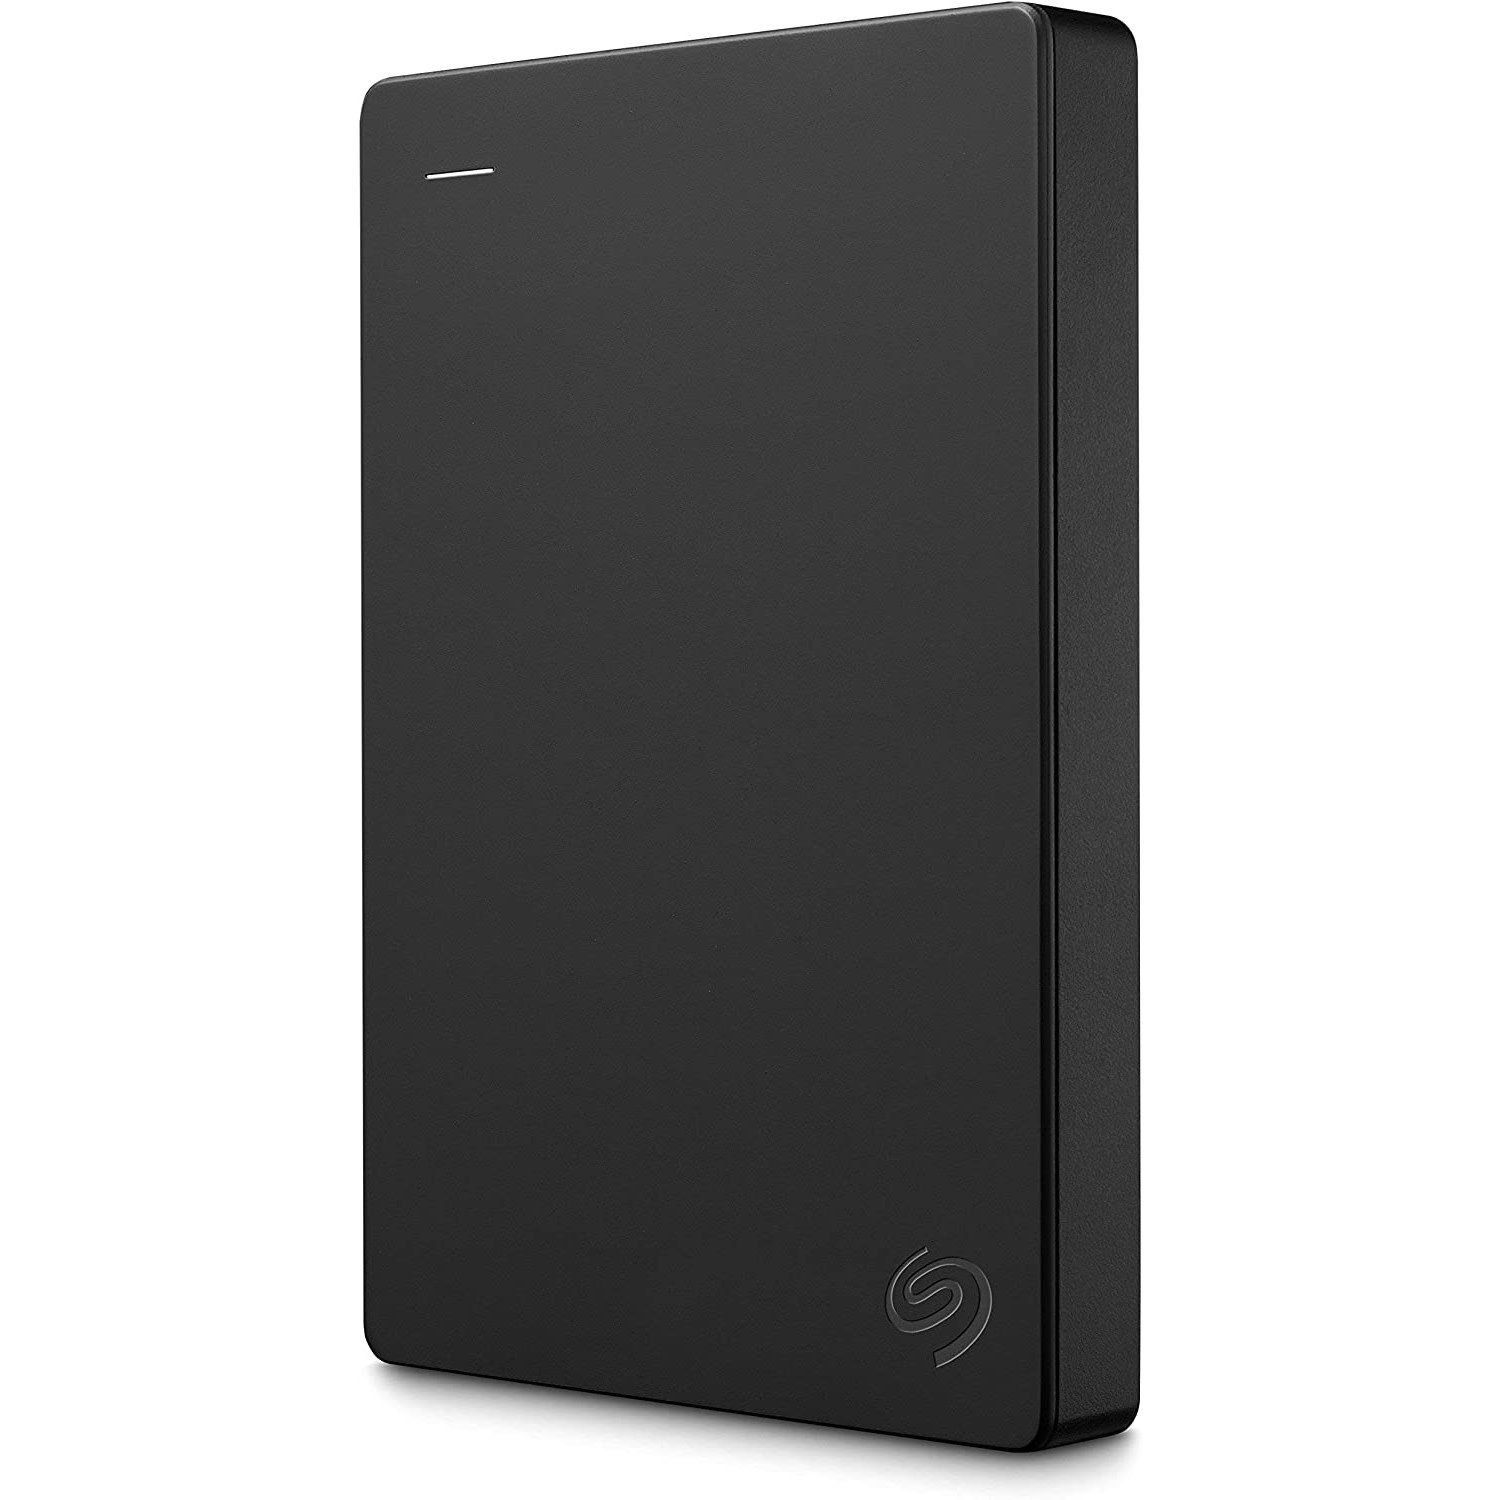 Seagate Portable 2TB External Hard Drive Portable HDD – USB 3.0 for PC, PS4, & Xbox - 1-Year Service (STGX2000400) - NWCA Inc.